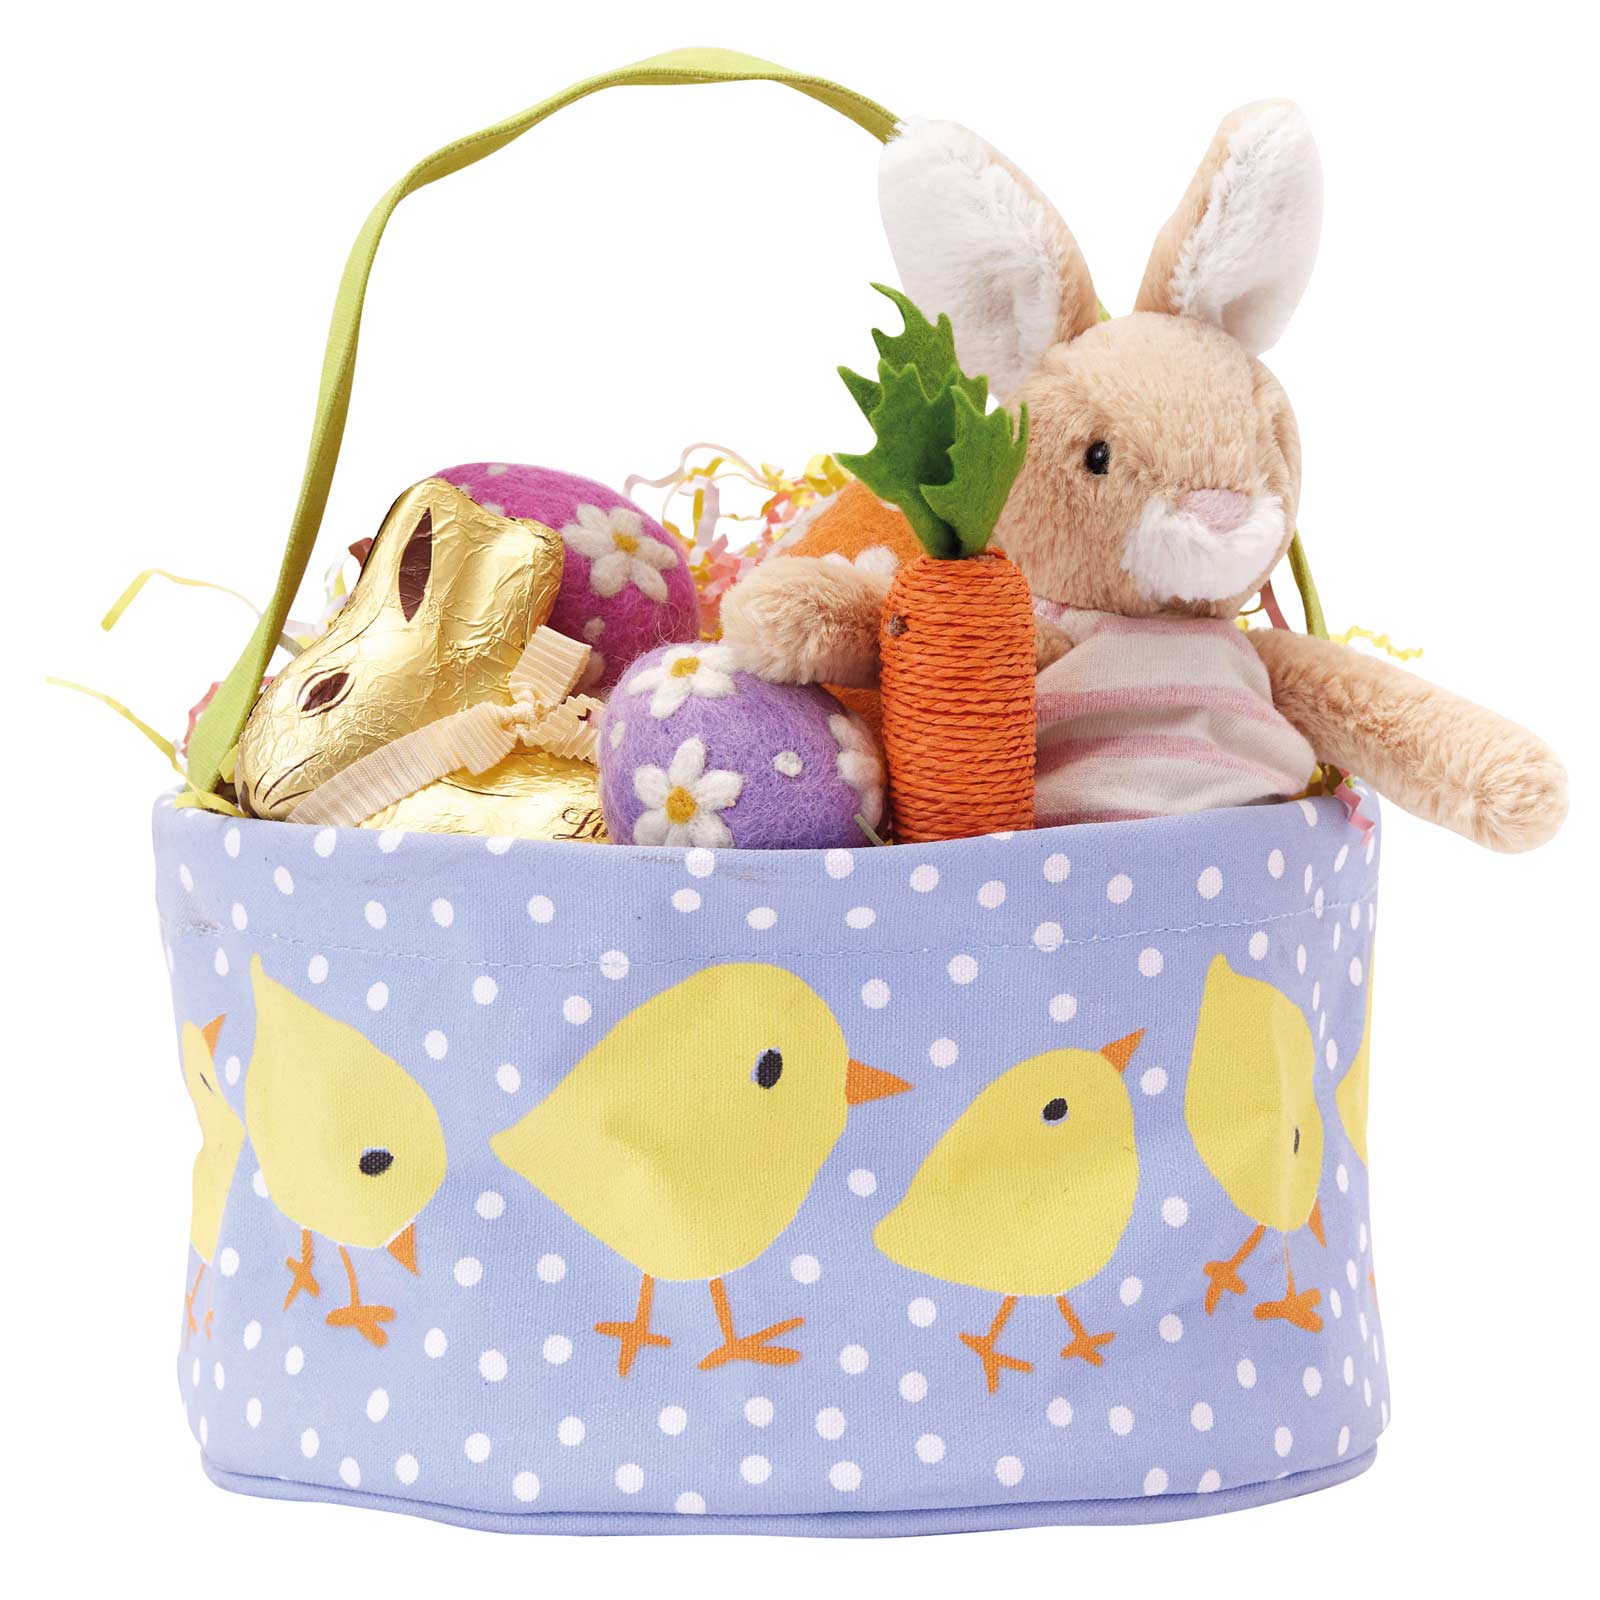 BABY CHICKS Reusable Canvas Easter Basket (Eco/bluCollection